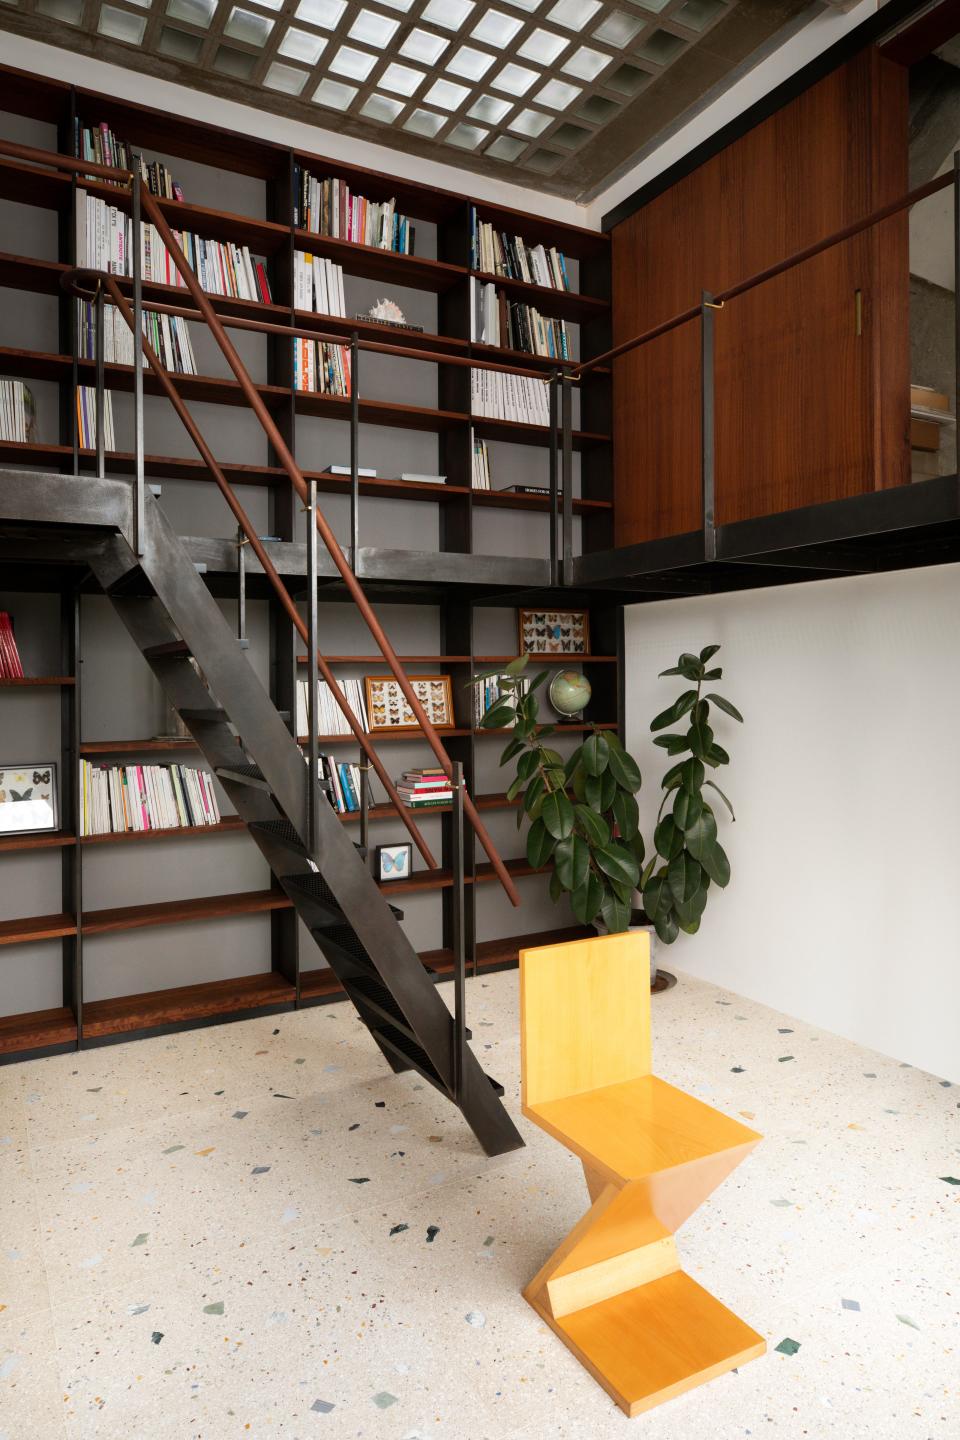 Chong transformed an extra bedroom into a library (he mostly reads art books) with a wraparound walkway and staircase. A yellow Gerrit Rietveld chair adds a pop of color against the custom terrazzo floor.